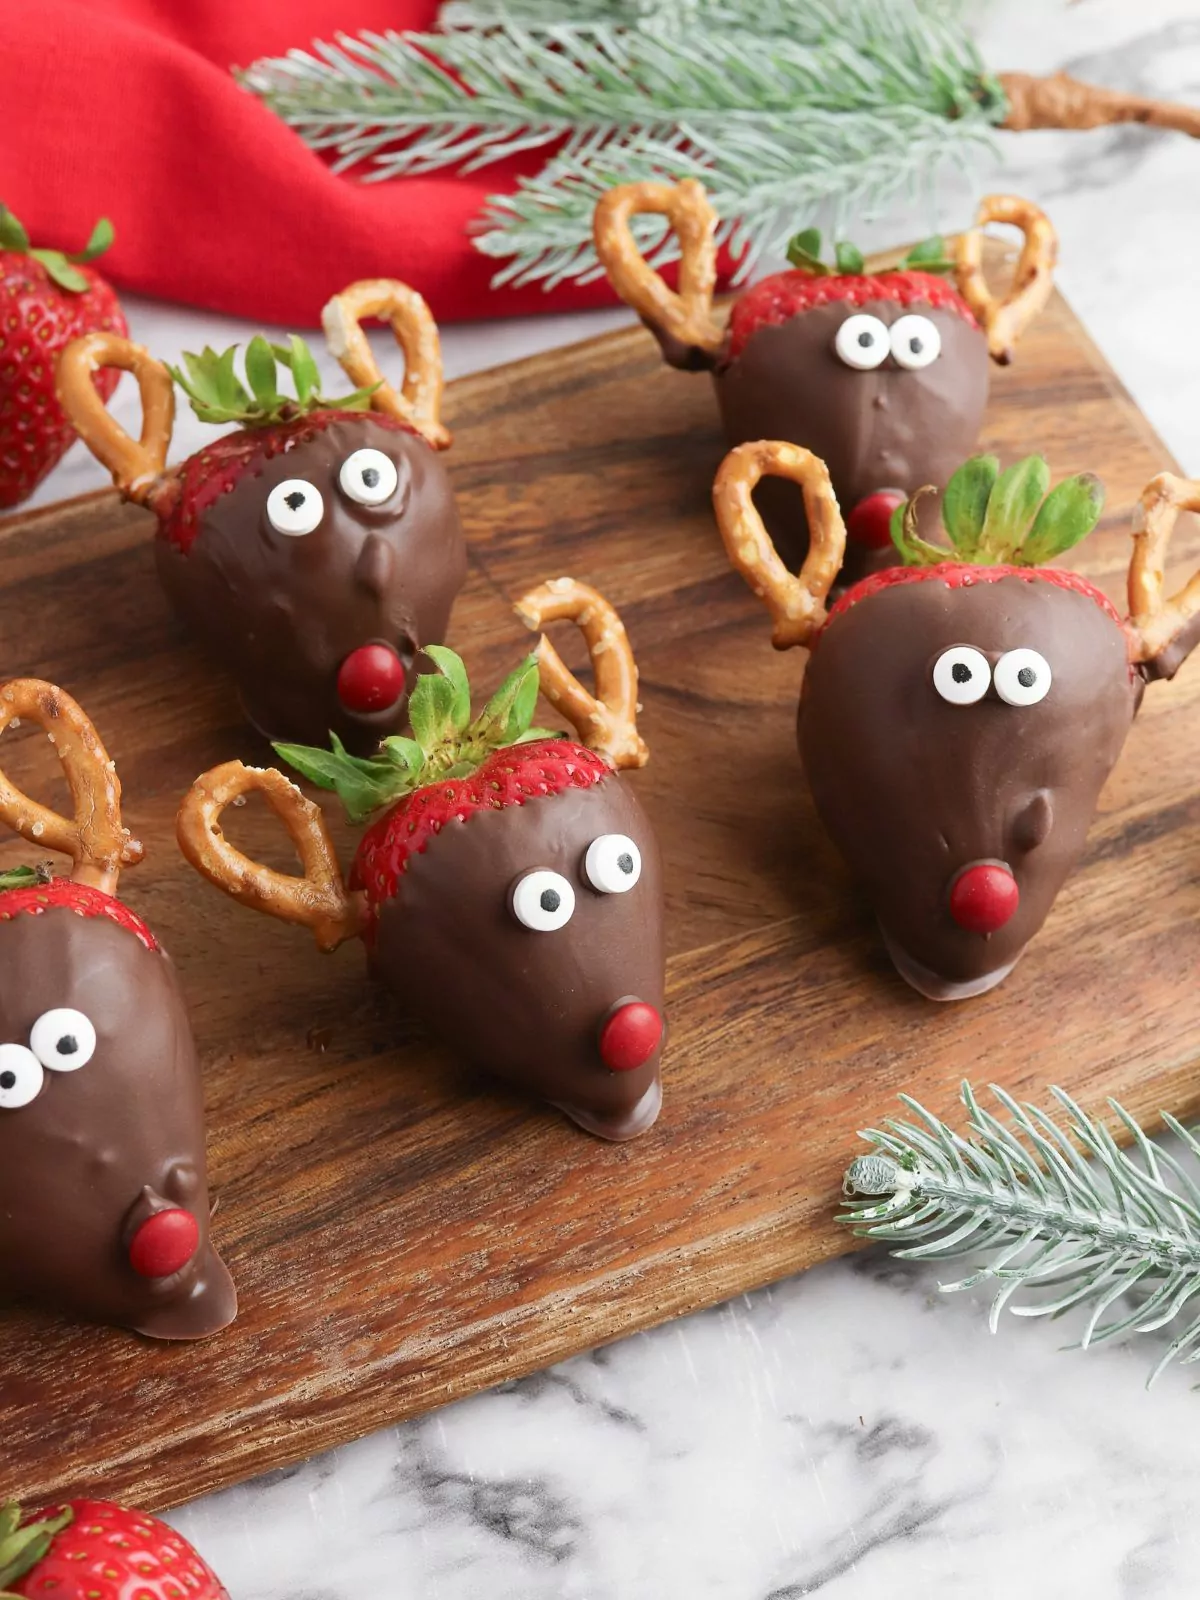 strawberries dipped in chocolate with pretzel antlers and candy eyes.